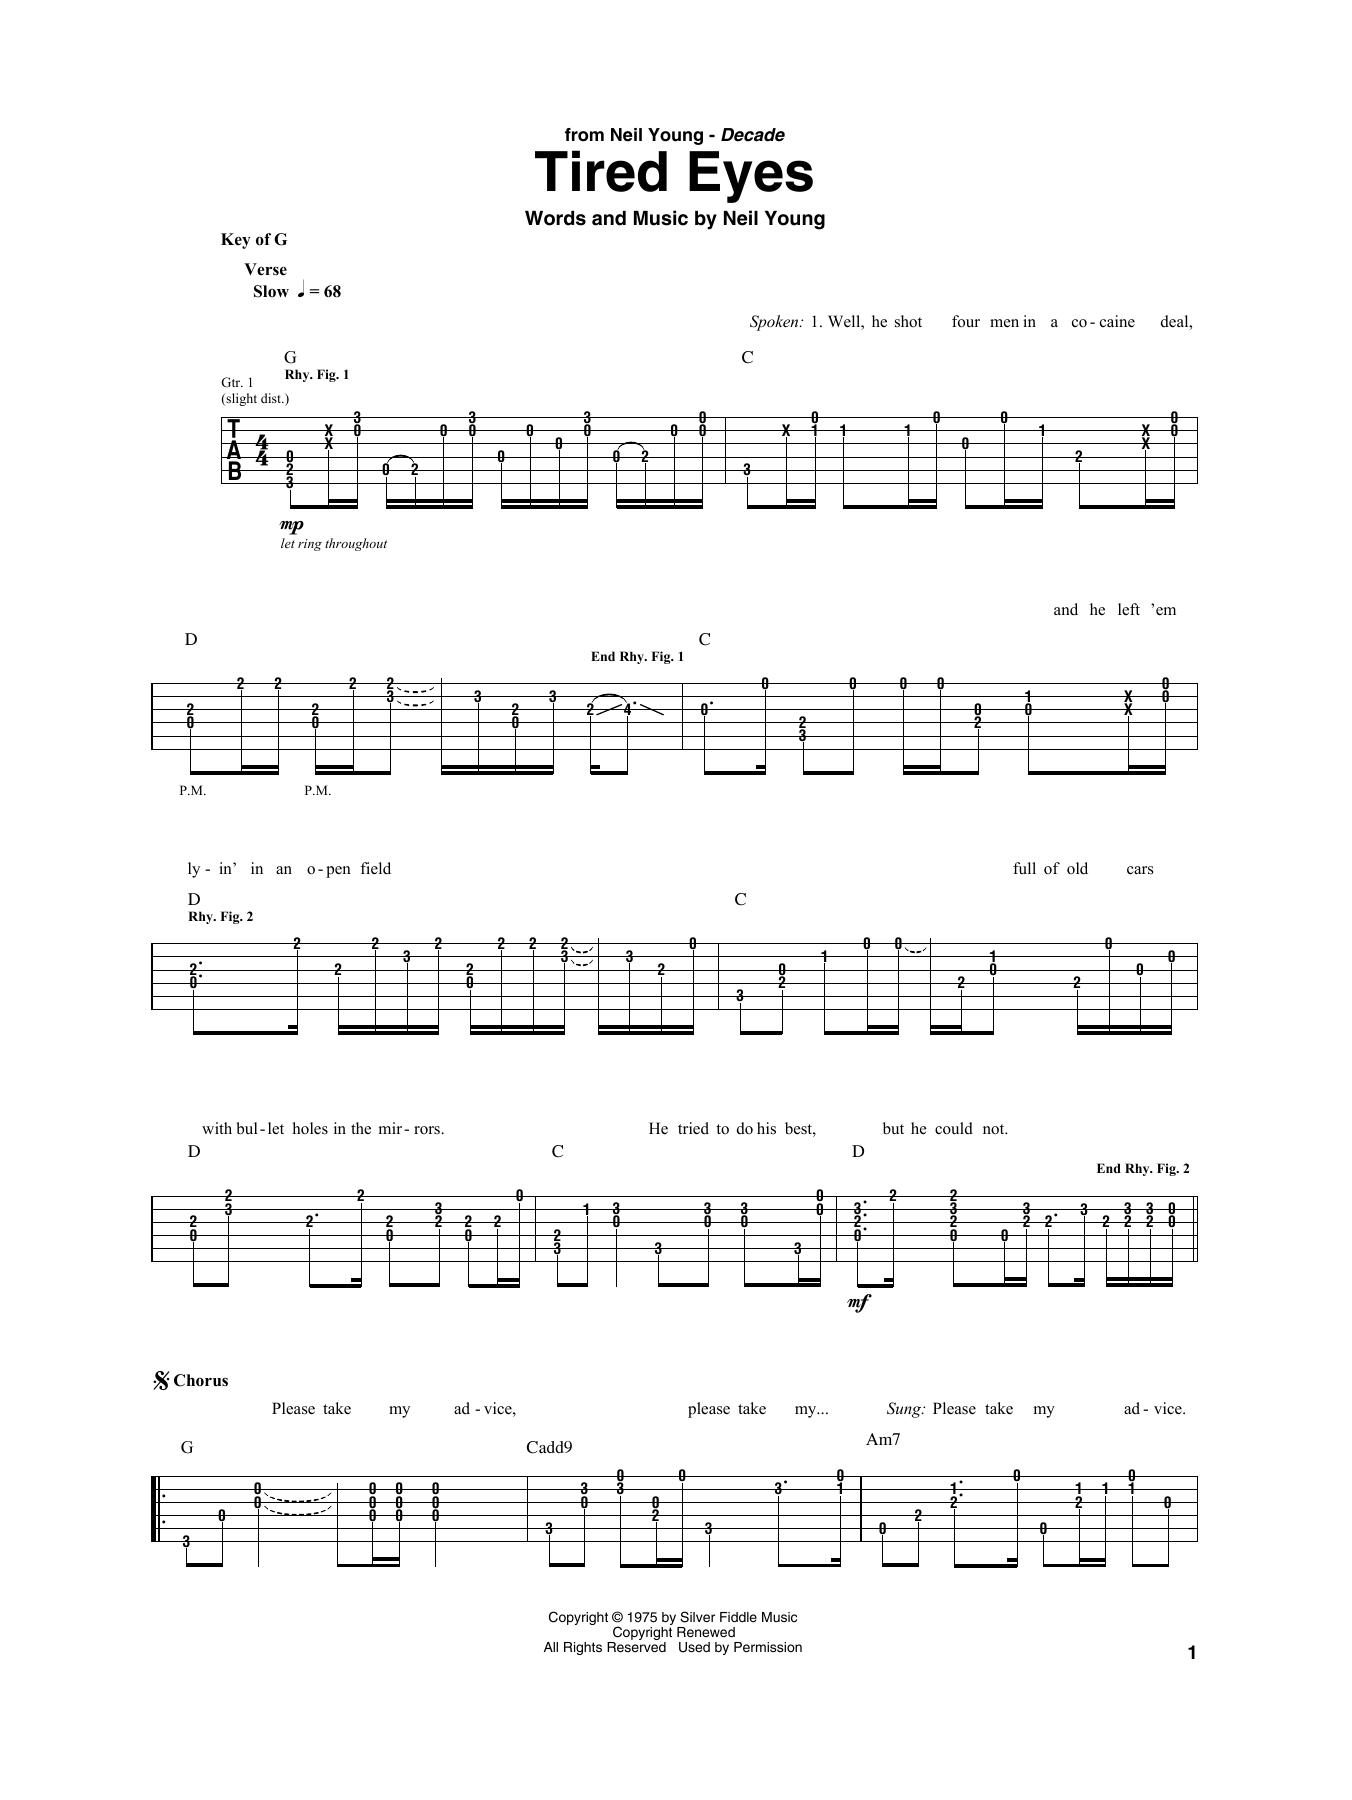 Download Neil Young Tired Eyes Sheet Music